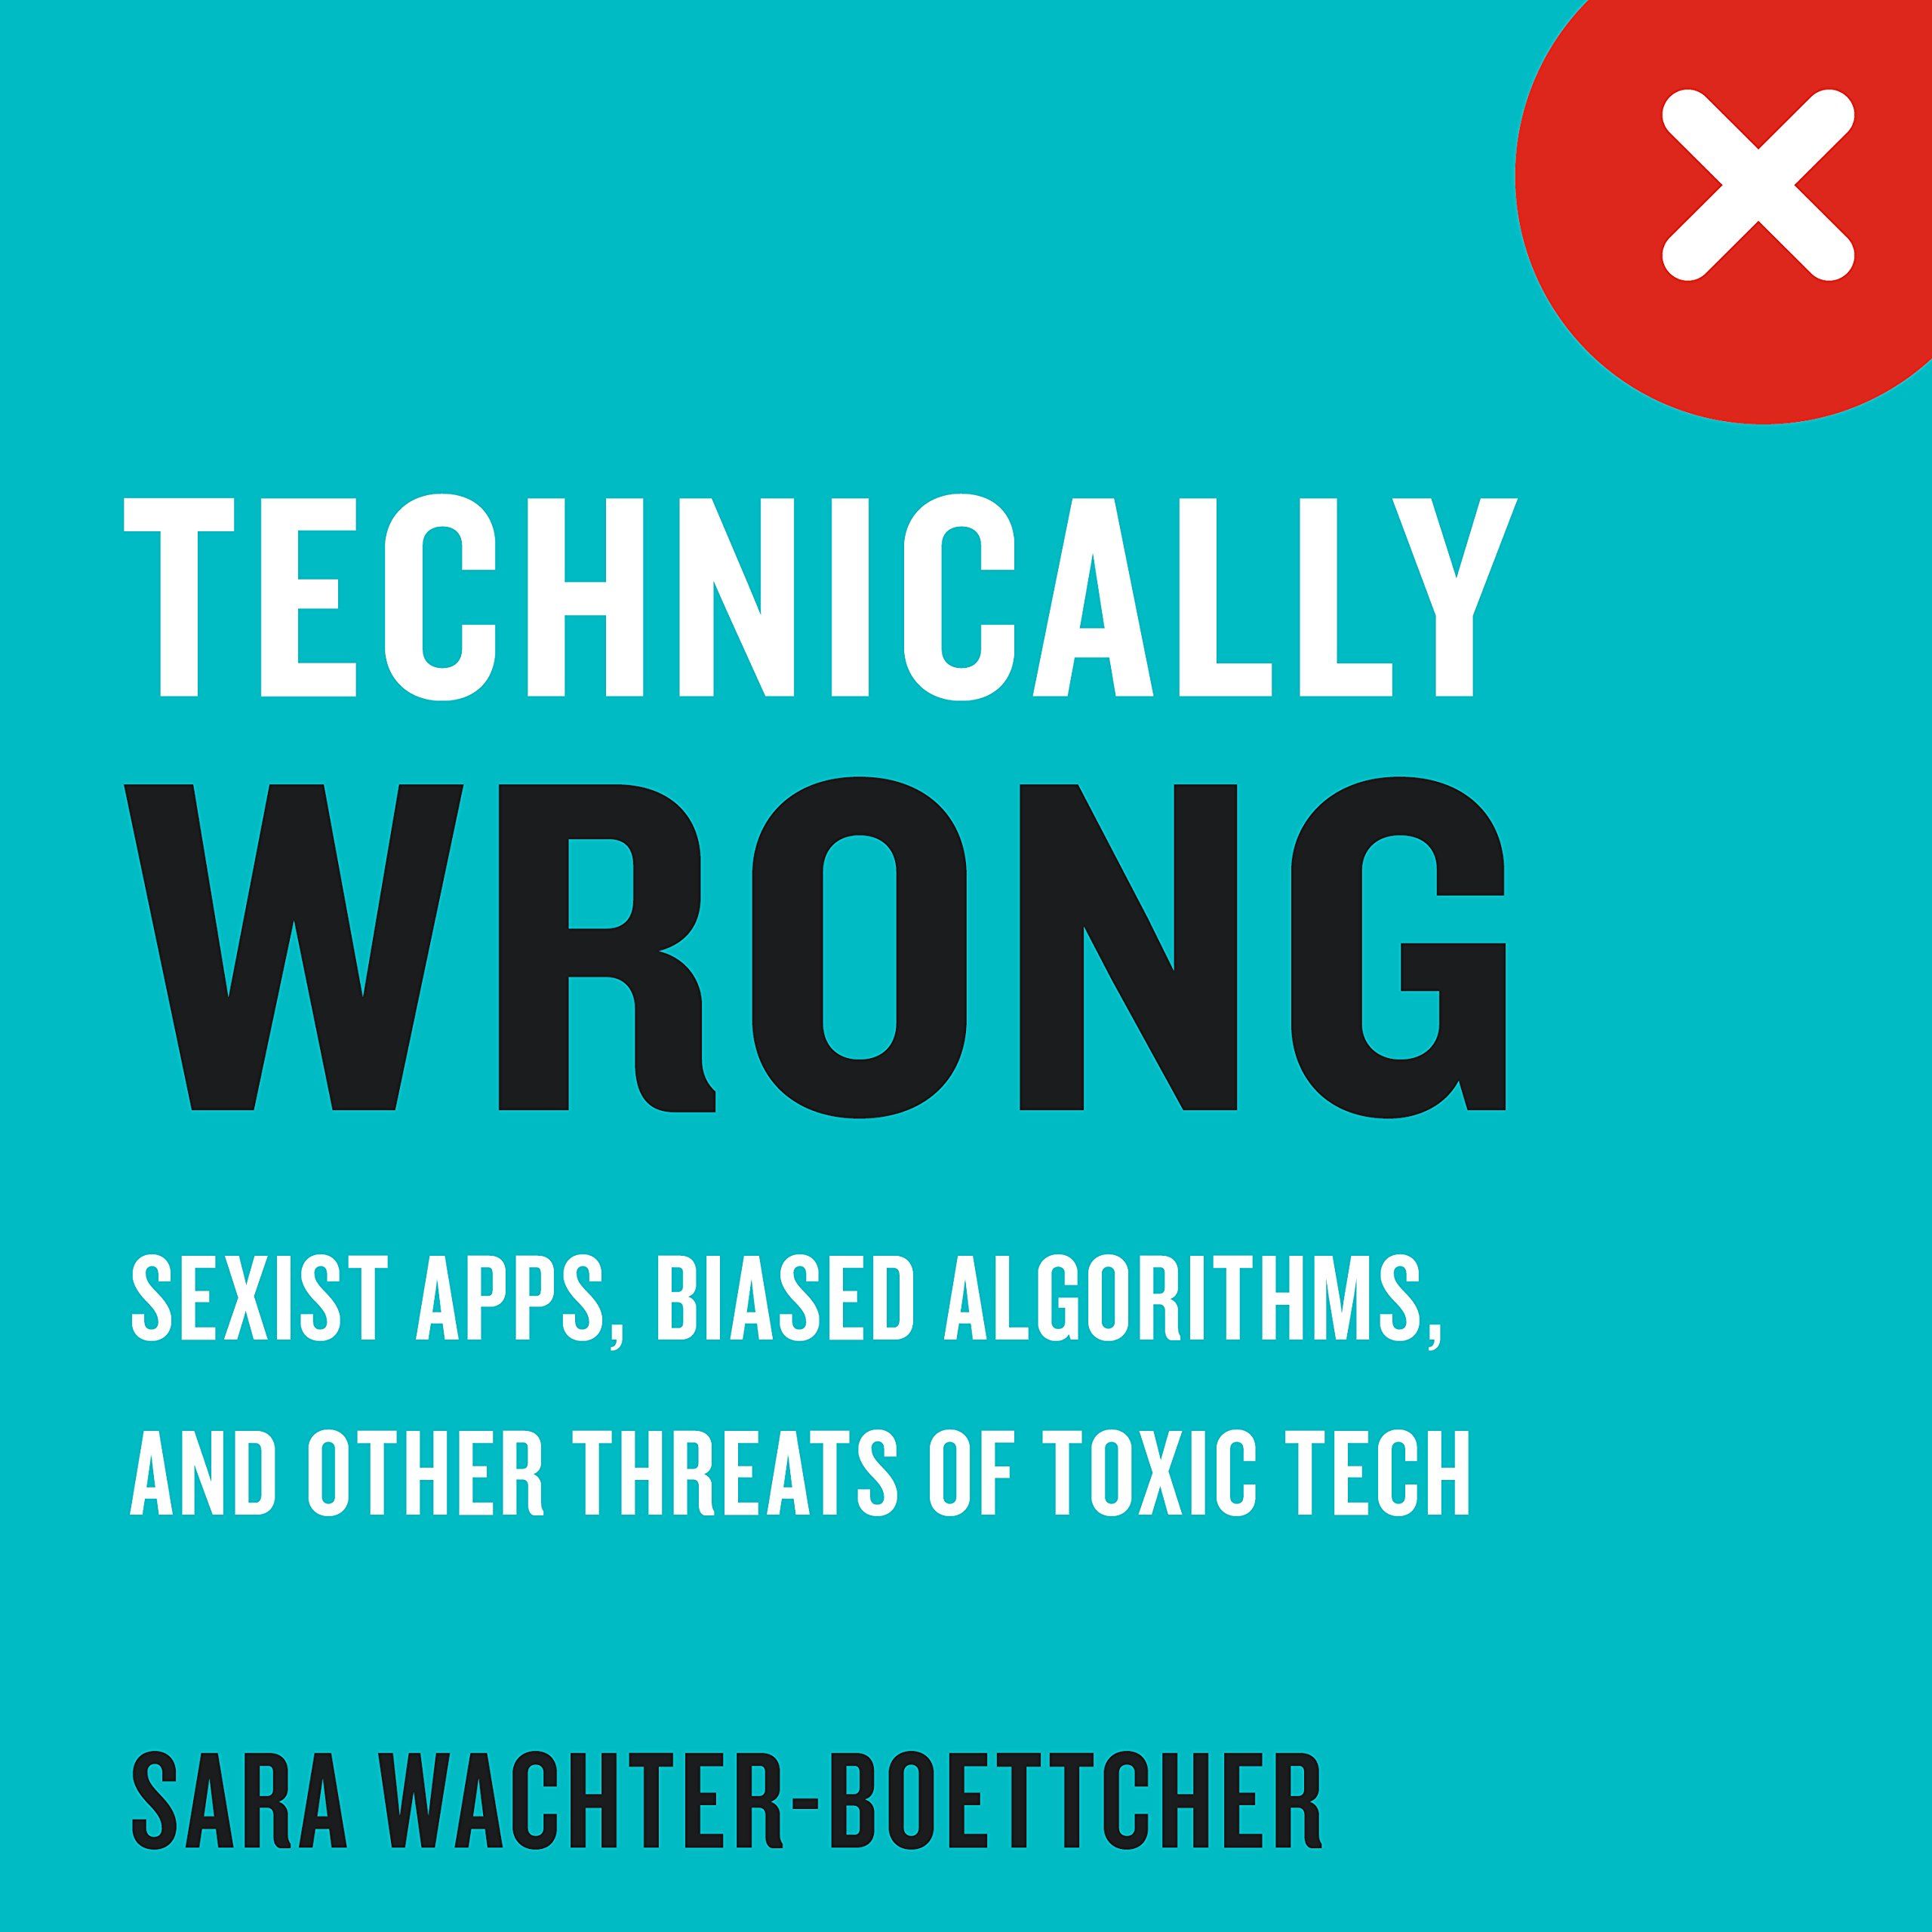 A book with a title "technically wrong" by Sarah Wachter-Boettcher  that talks about sexist apps, biased algorithms and other threats to toxic tech that will eventually change your perspective in life and tech